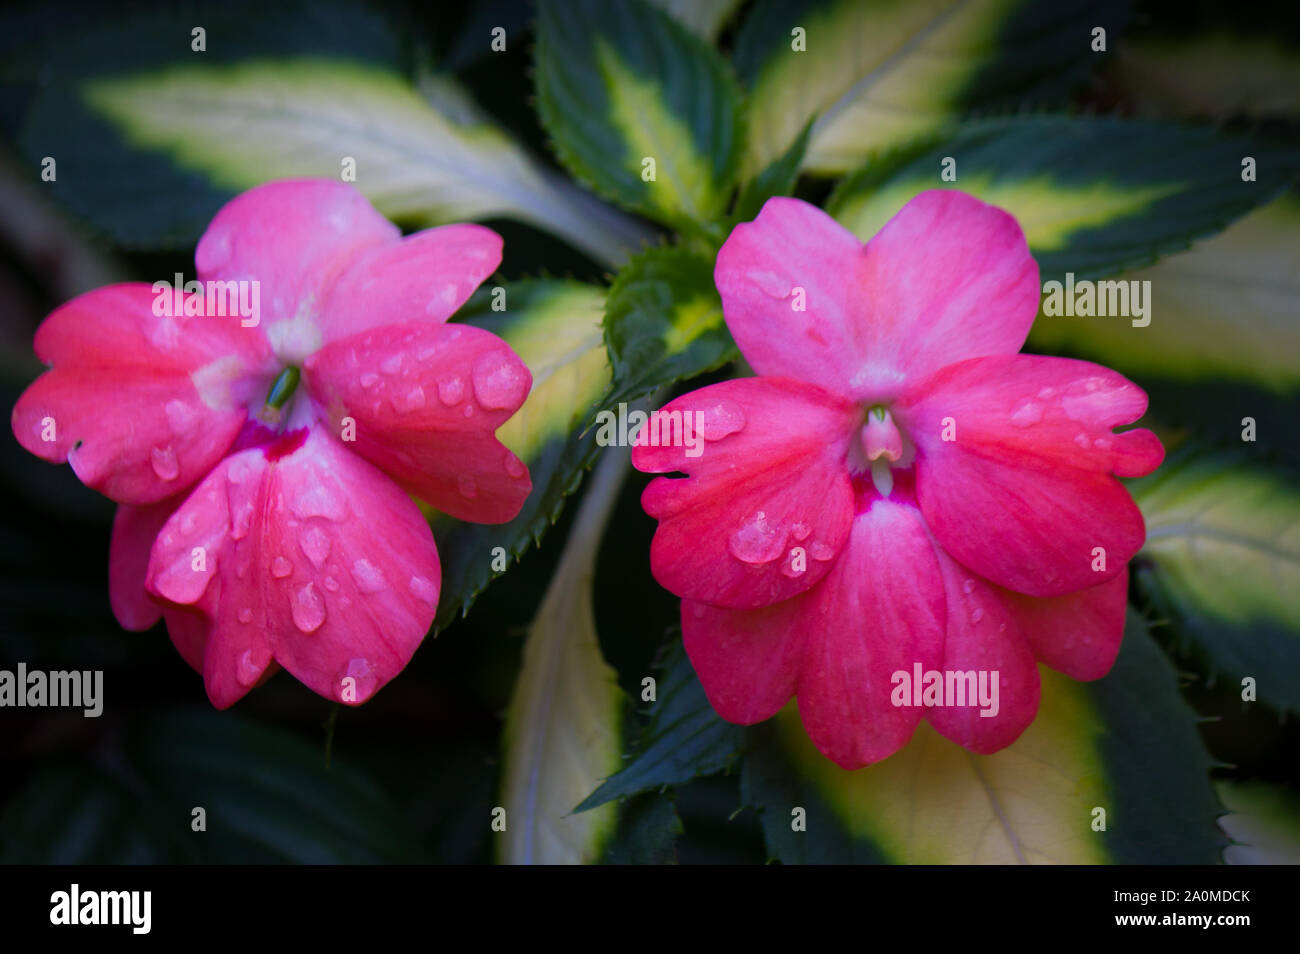 Two Pink impatiens flowers with water droplets on petals. Sub-species of the Balsaminaceae family. These flowers can occur in many different colors. Stock Photo